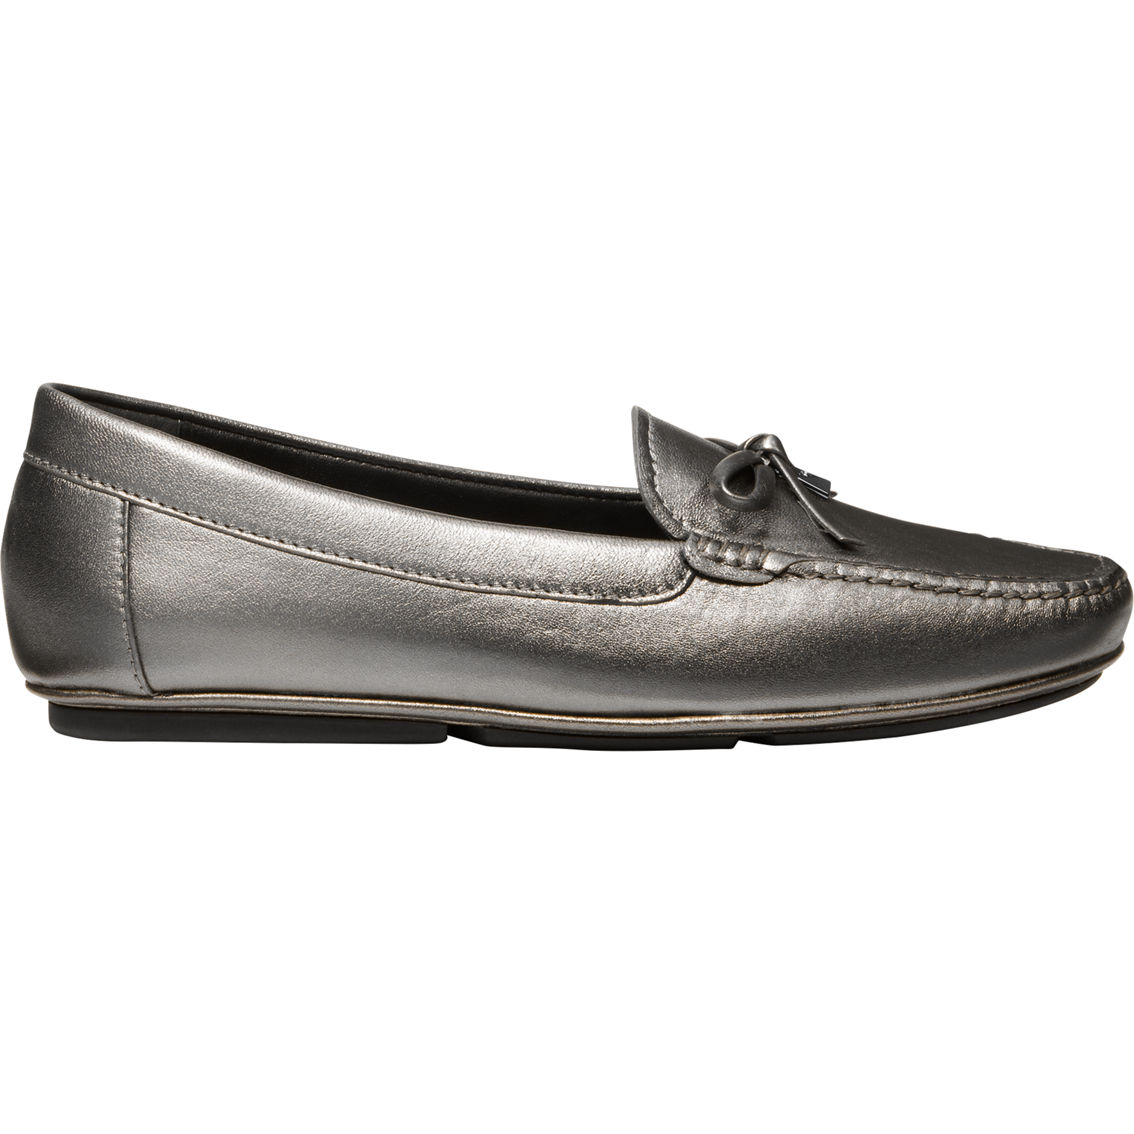 Michael Kors Juliette Leather Loafers - Image 2 of 3